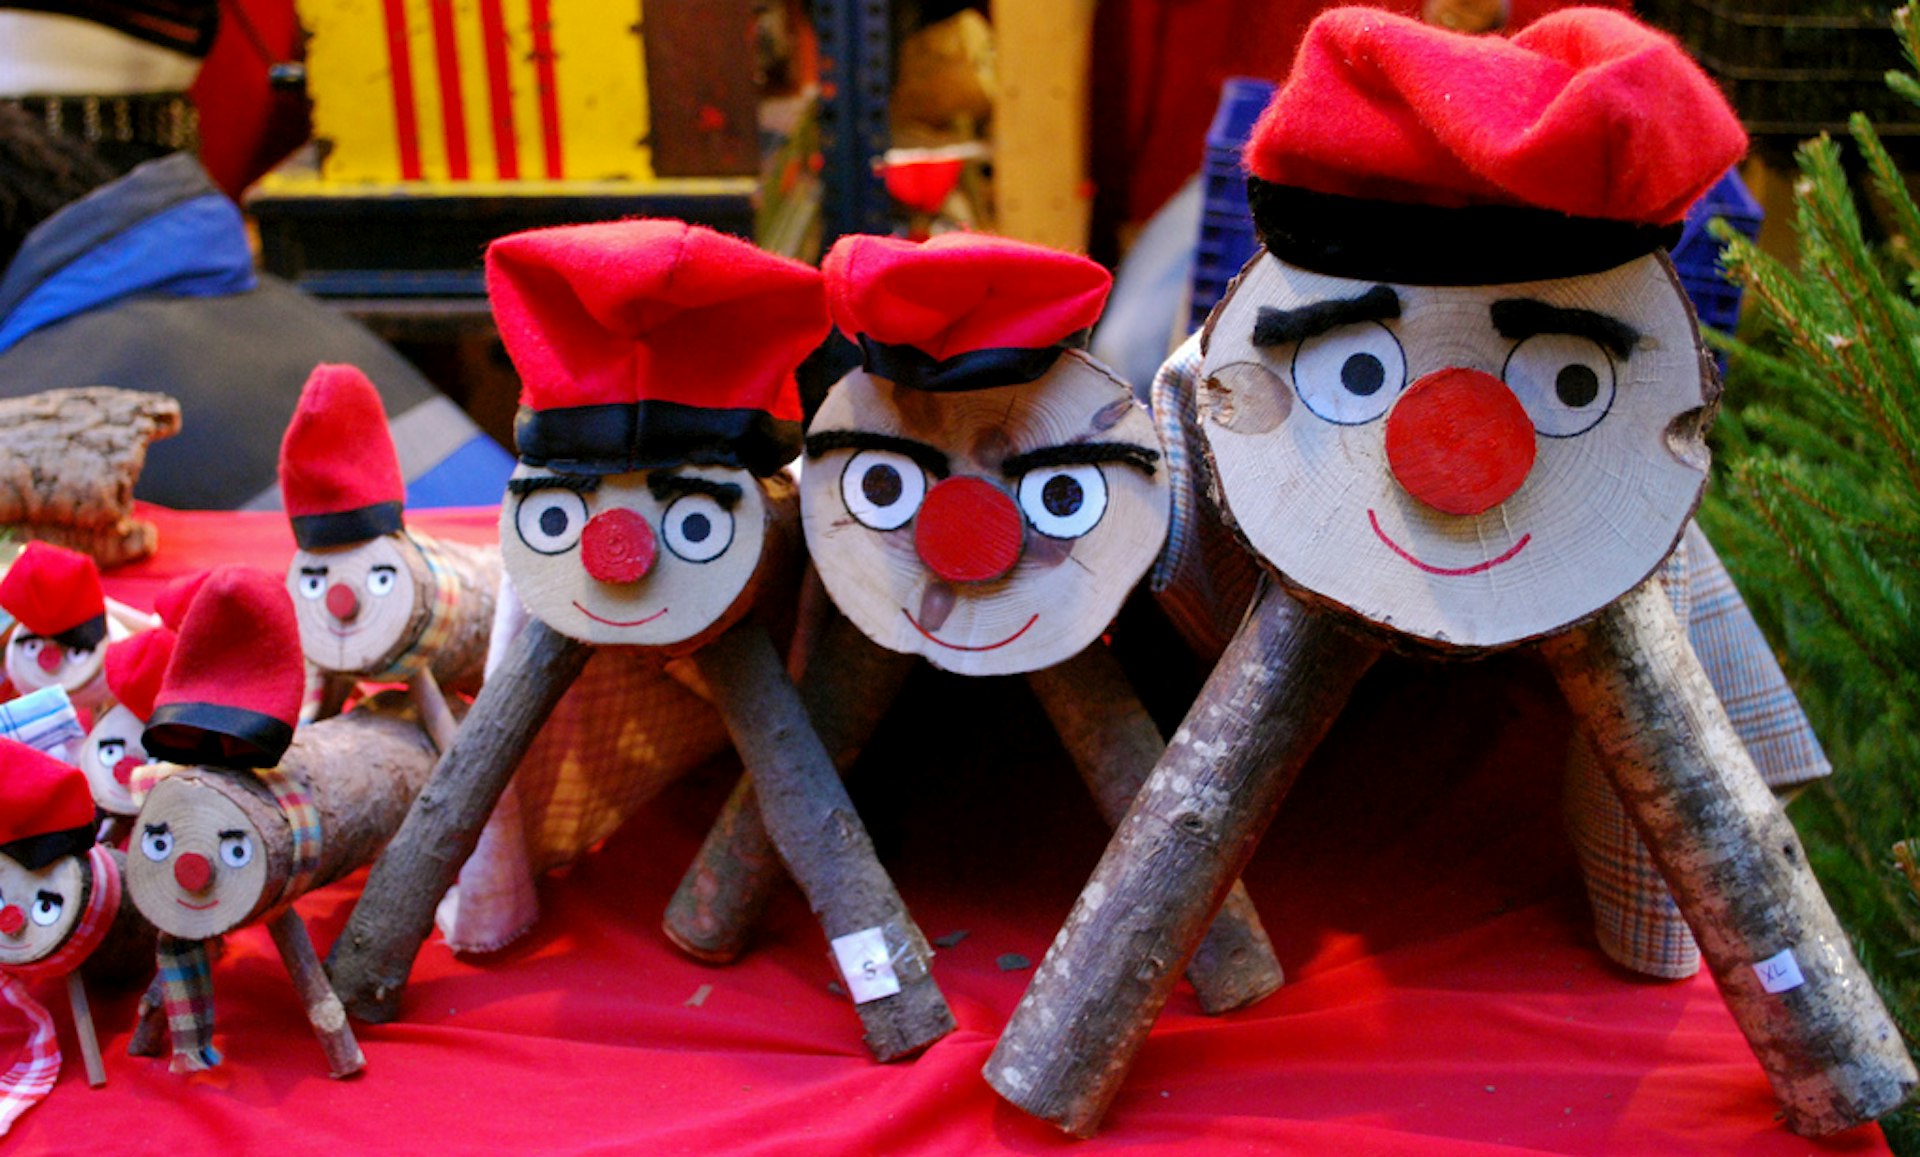 Caga tió logs are a Catalan tradition. Image by Valerie Hinojosa / CC BY-SA 2.0